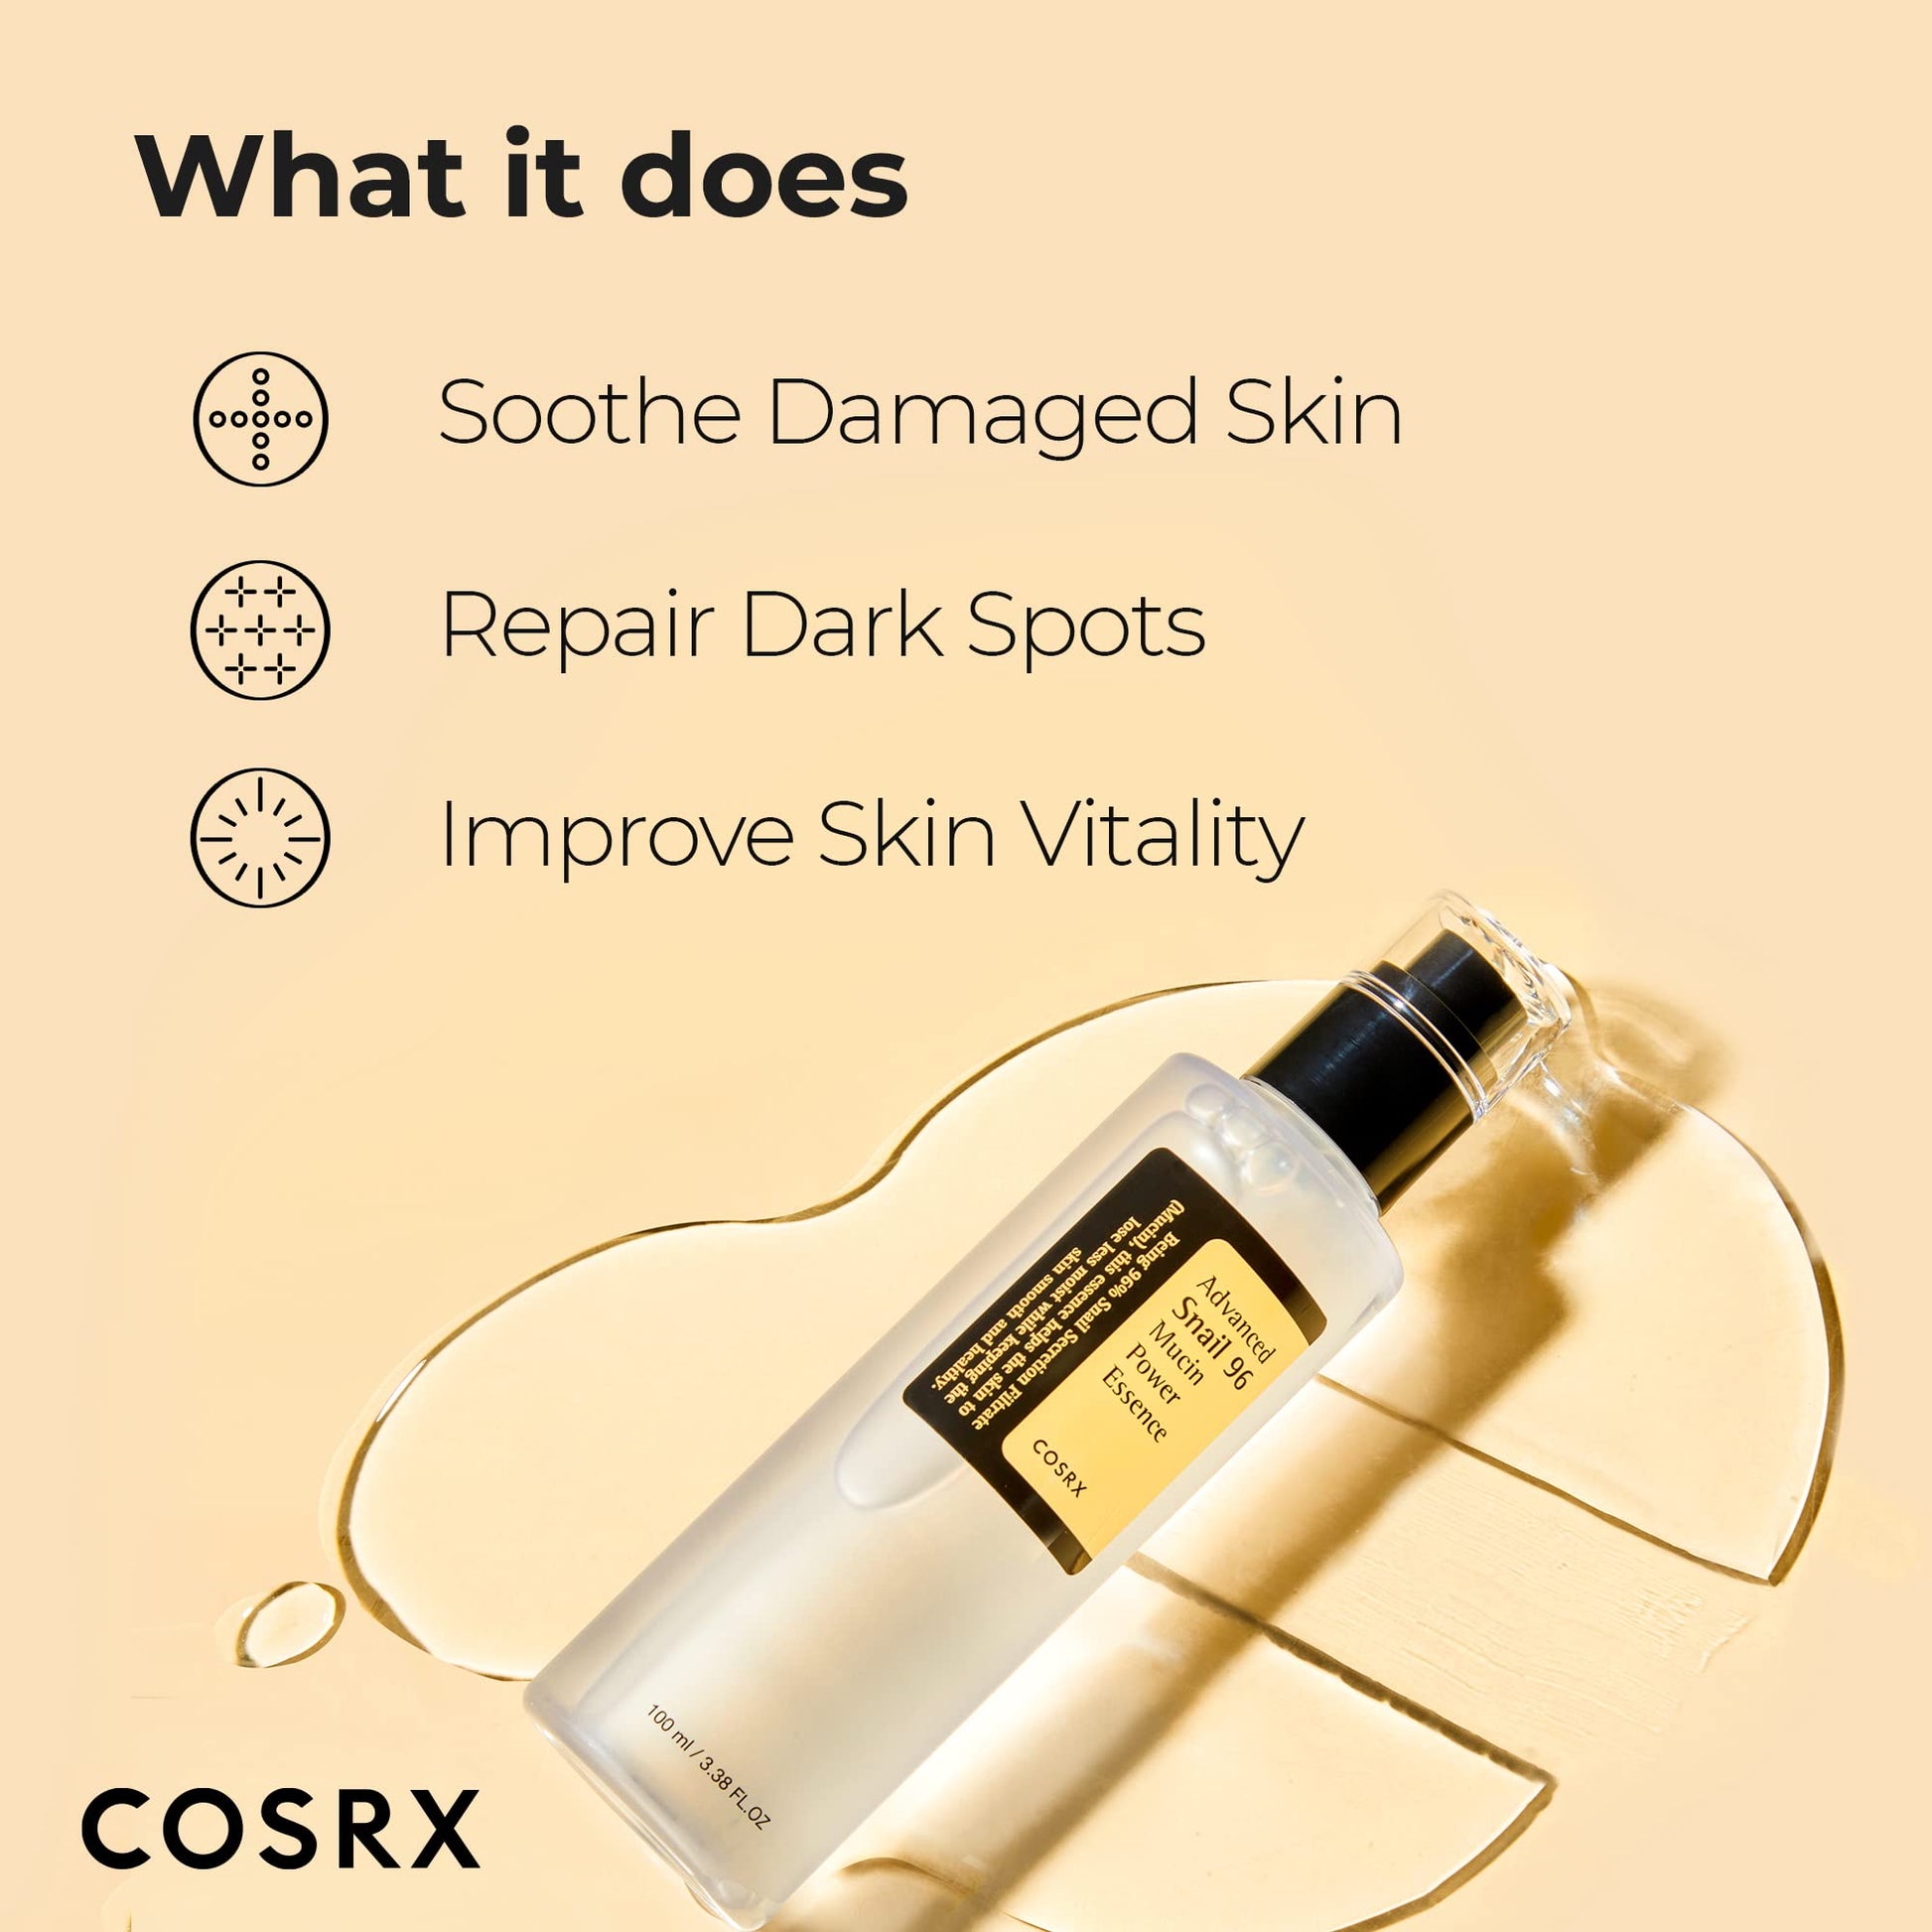 What it does COSRX Snail Mucin Essence (96%) - Hydrating Face Serum for Glowing Skin (100ml) - Korean Skincare, Dullness & Fine Lines